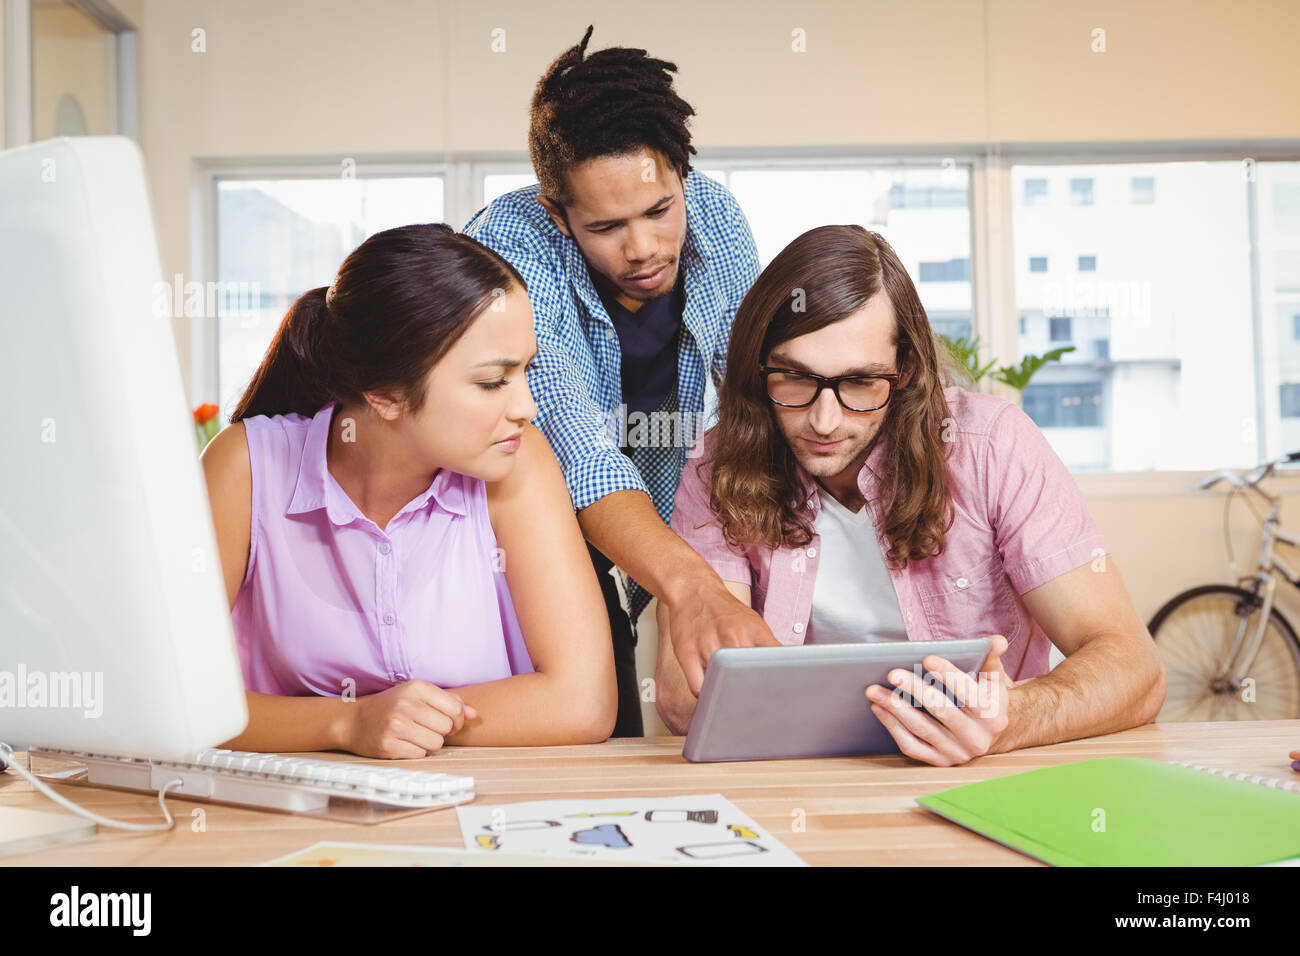 Business people discussing over digital tablet during meeting Stock Photo